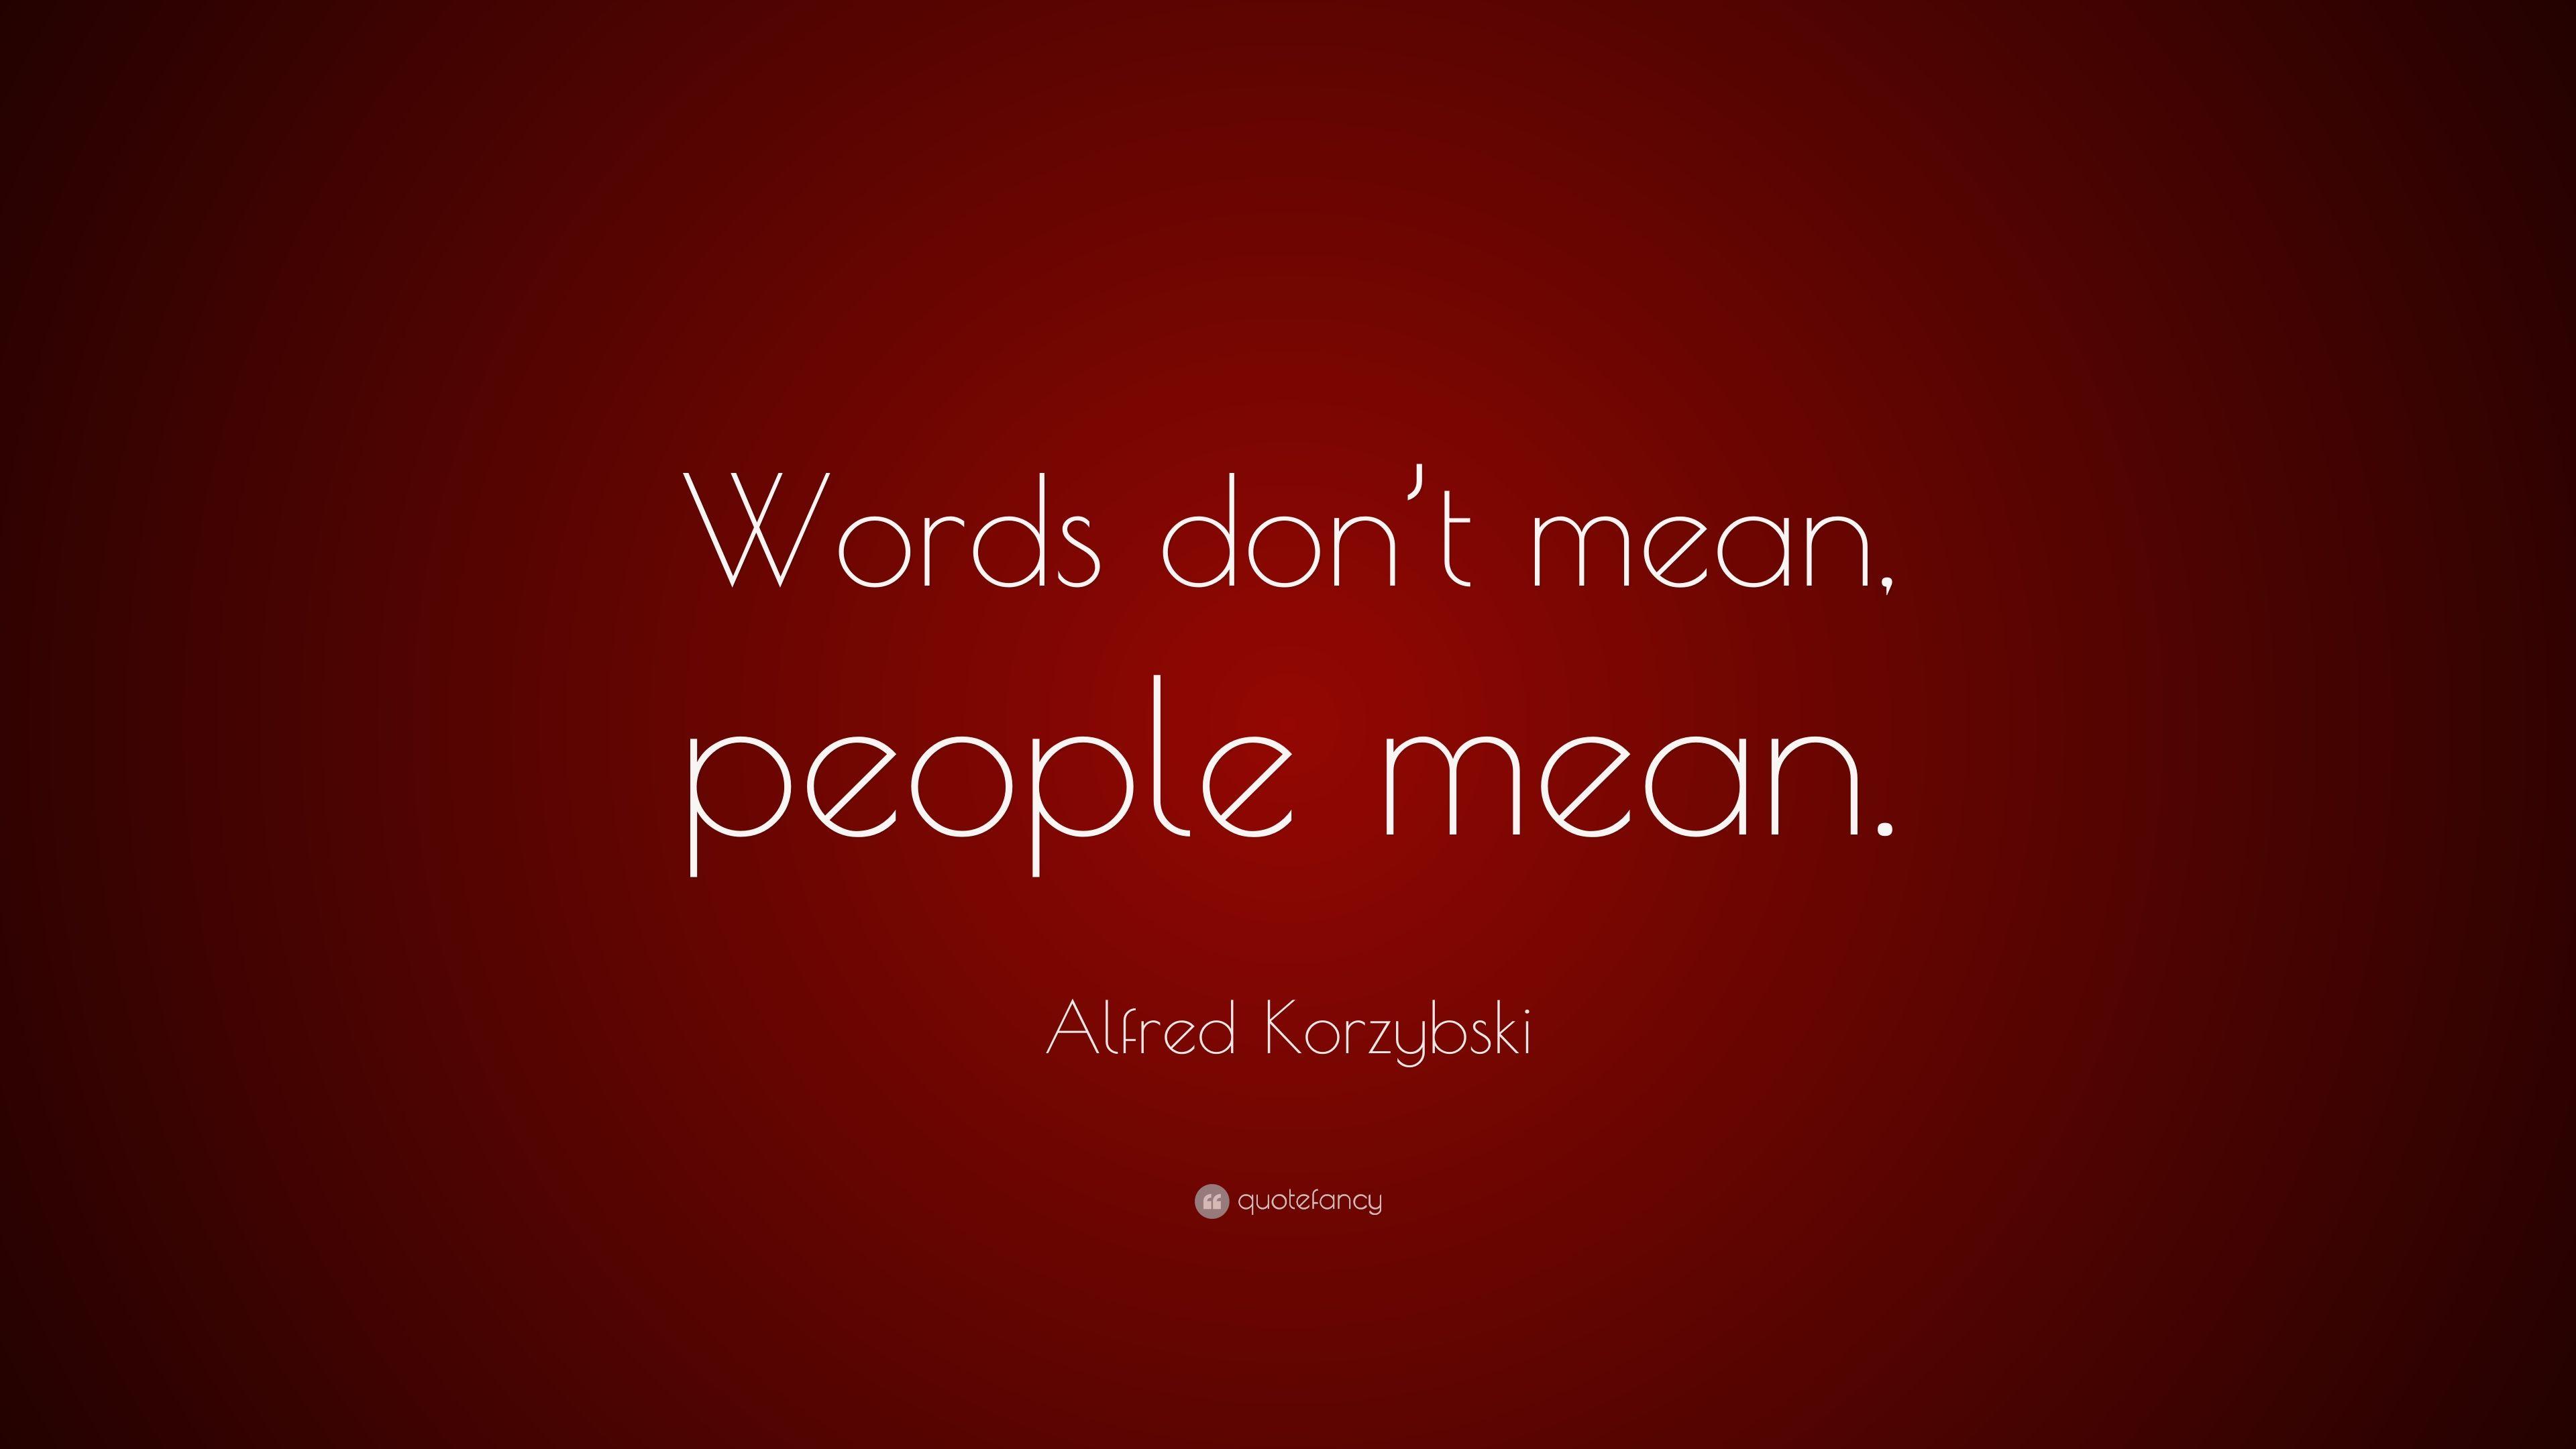 Alfred Korzybski Quote: “Words don't mean, people mean.” 9